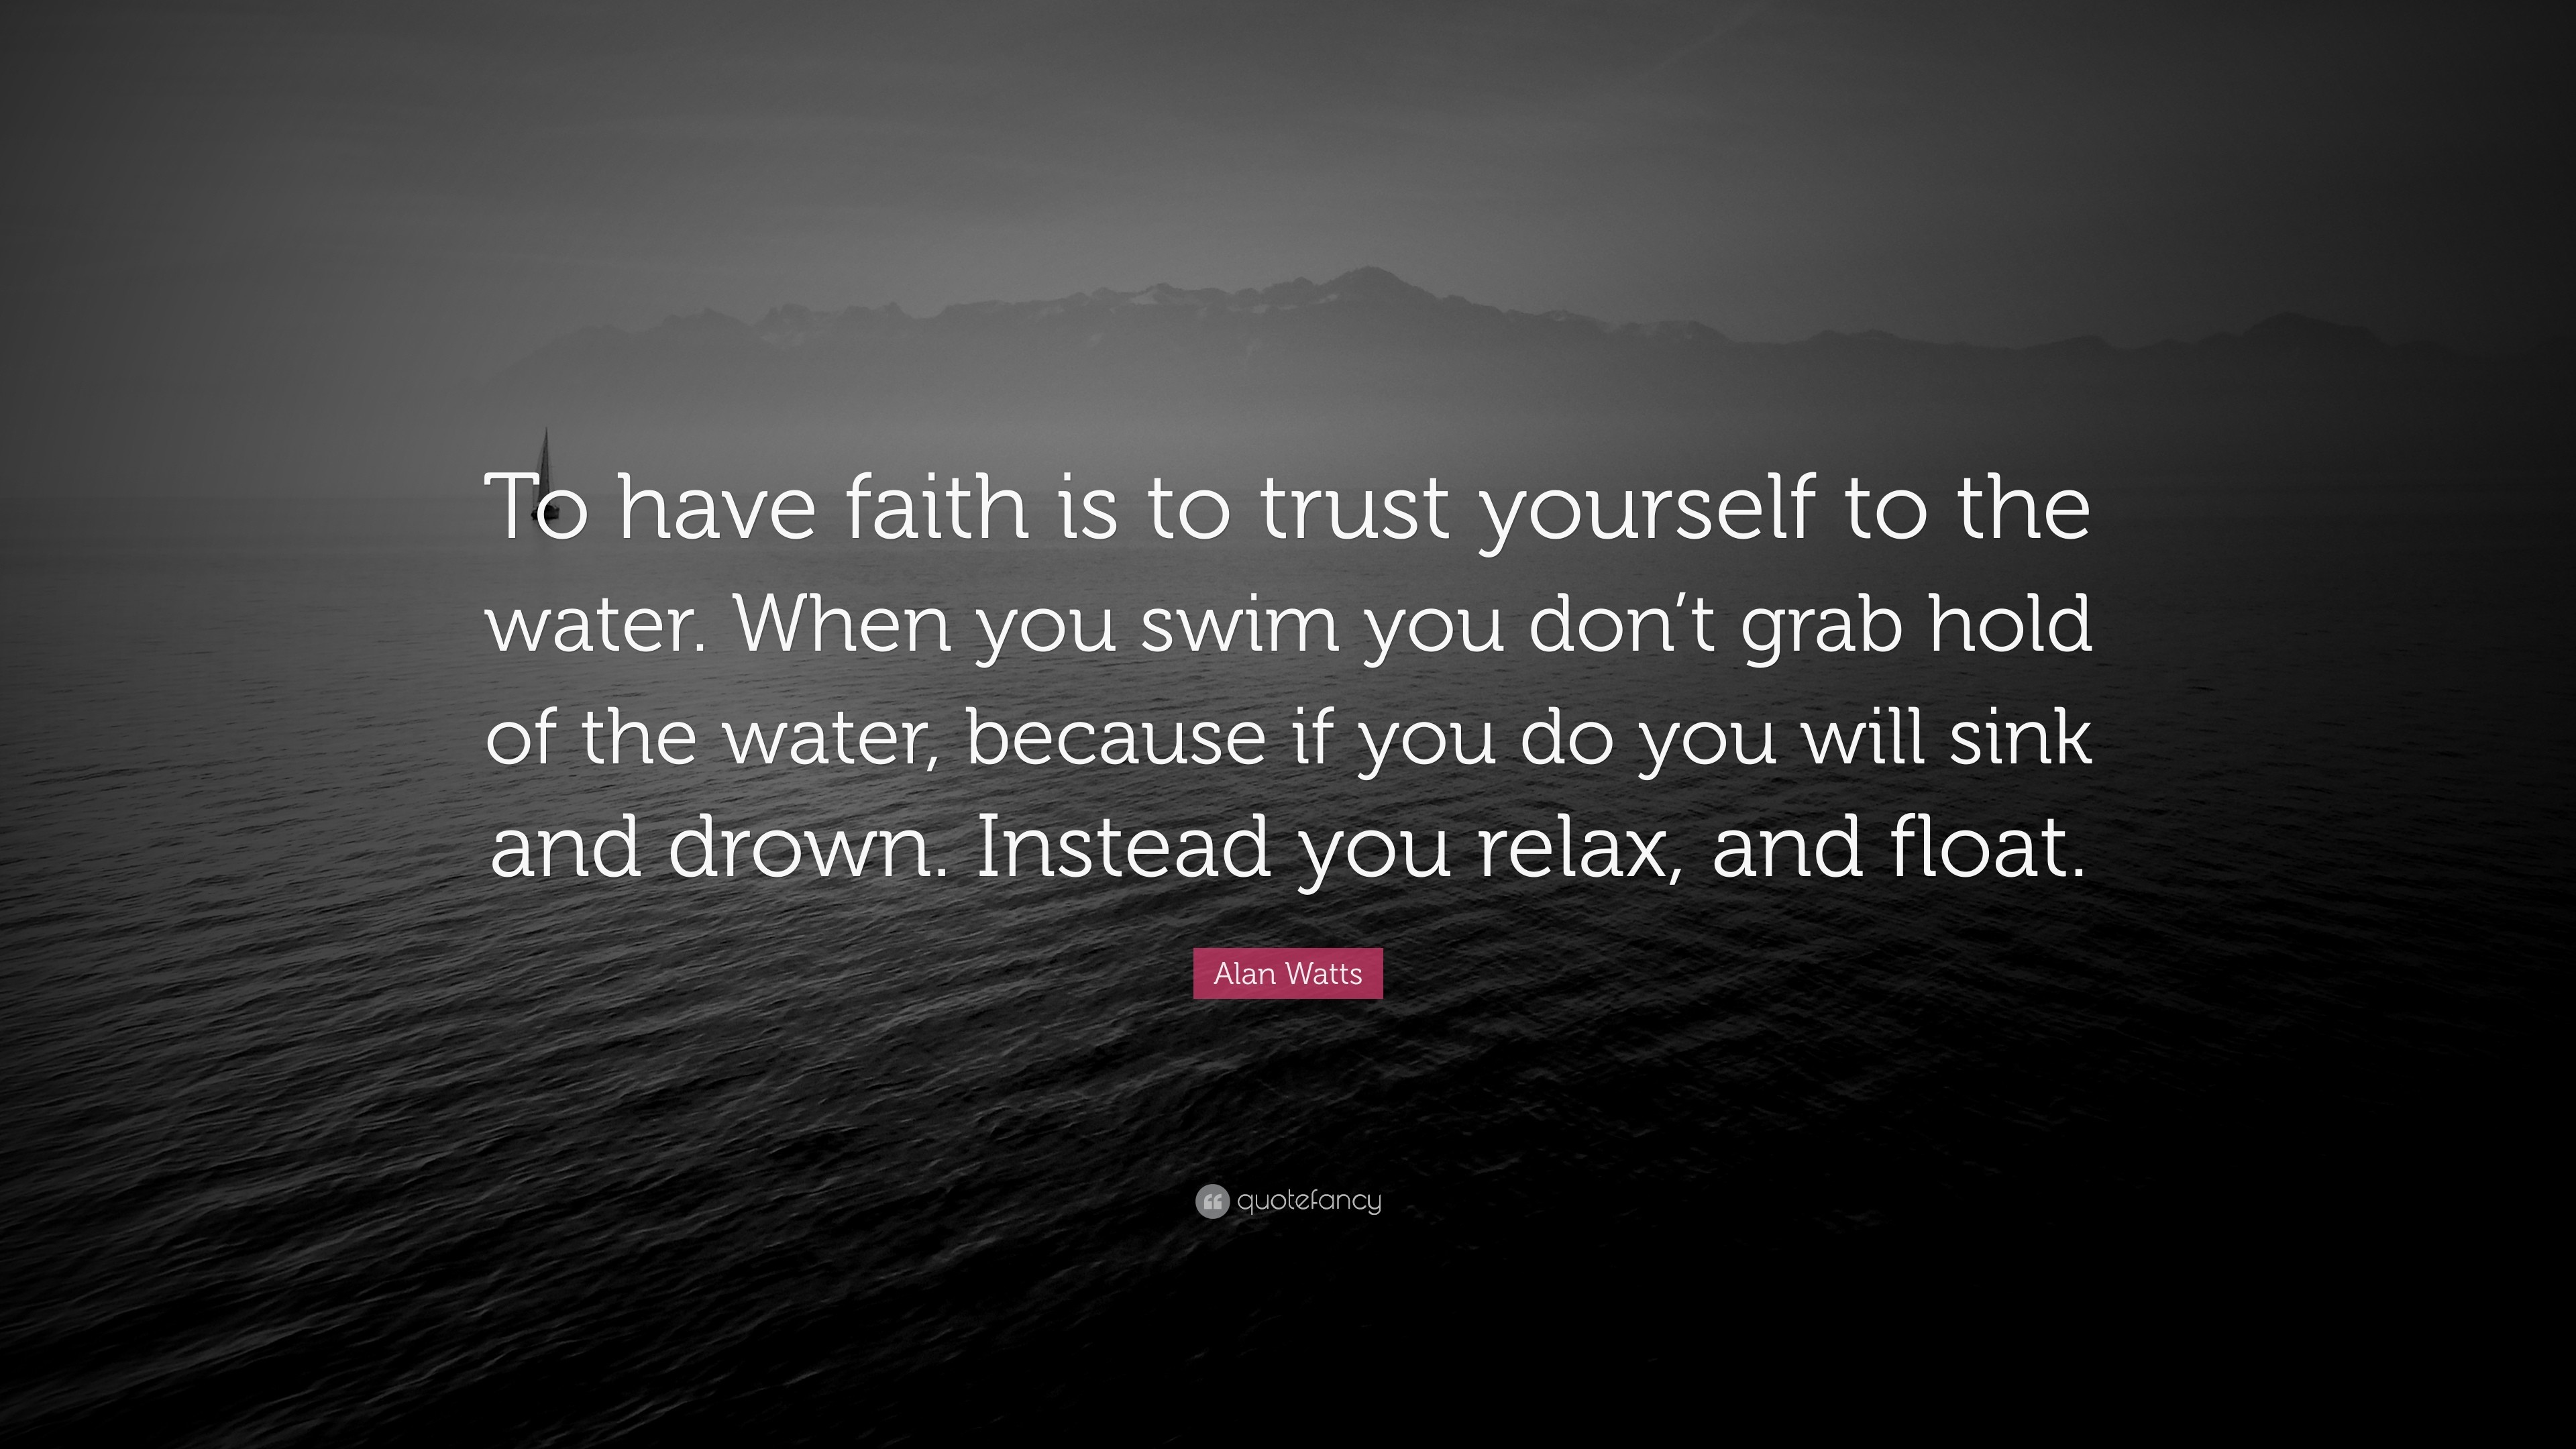 3840x2160 Alan Watts Quote: “To have faith is to trust yourself to the water.